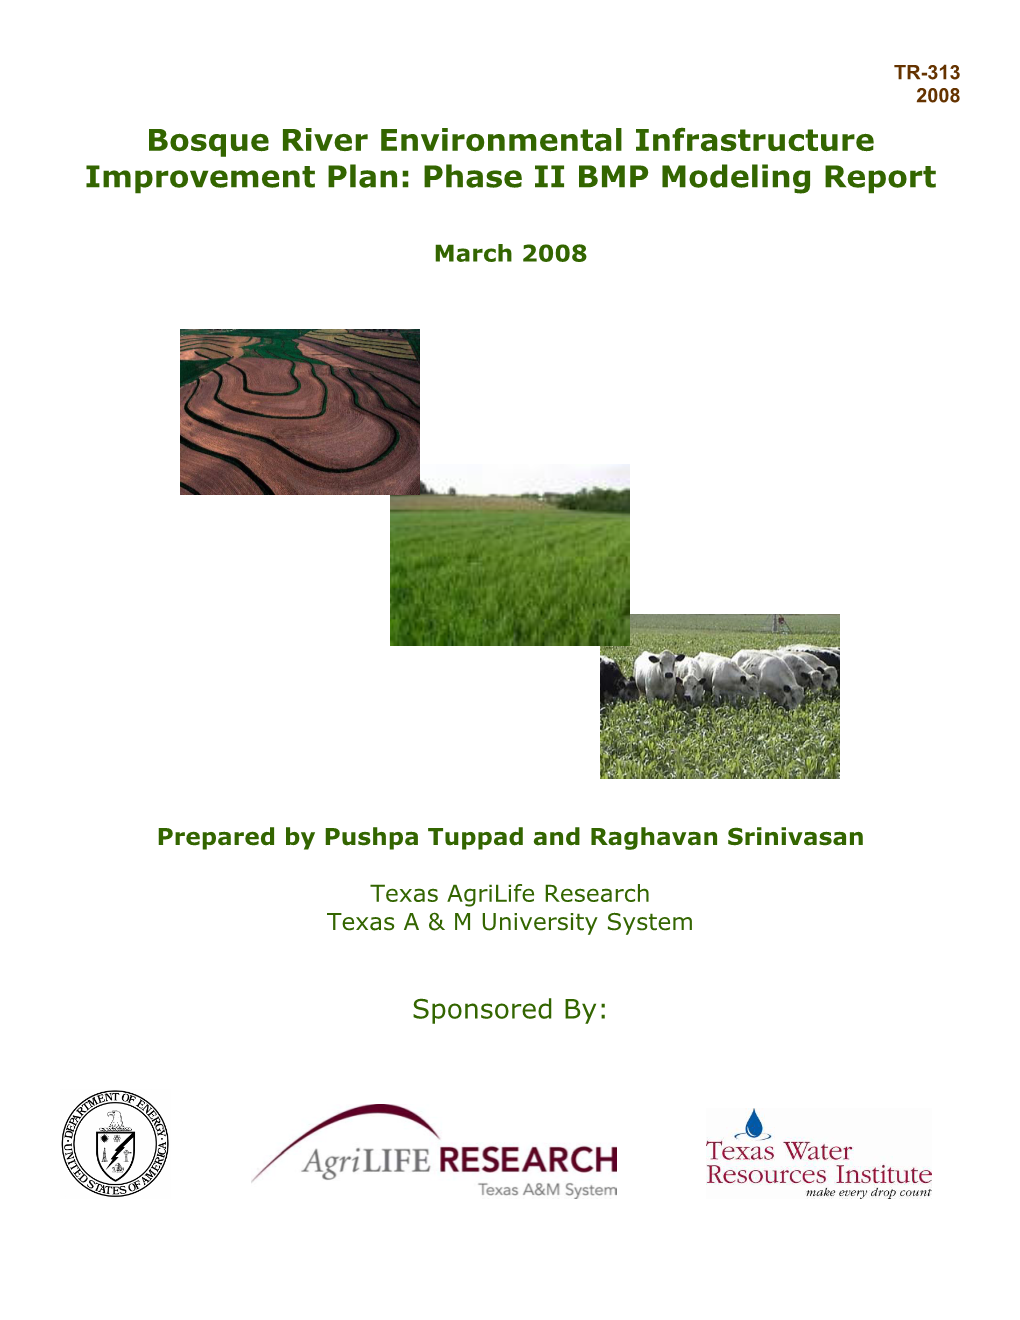 Bosque River Environmental Infrastructure Improvement Plan: Phase II BMP Modeling Report